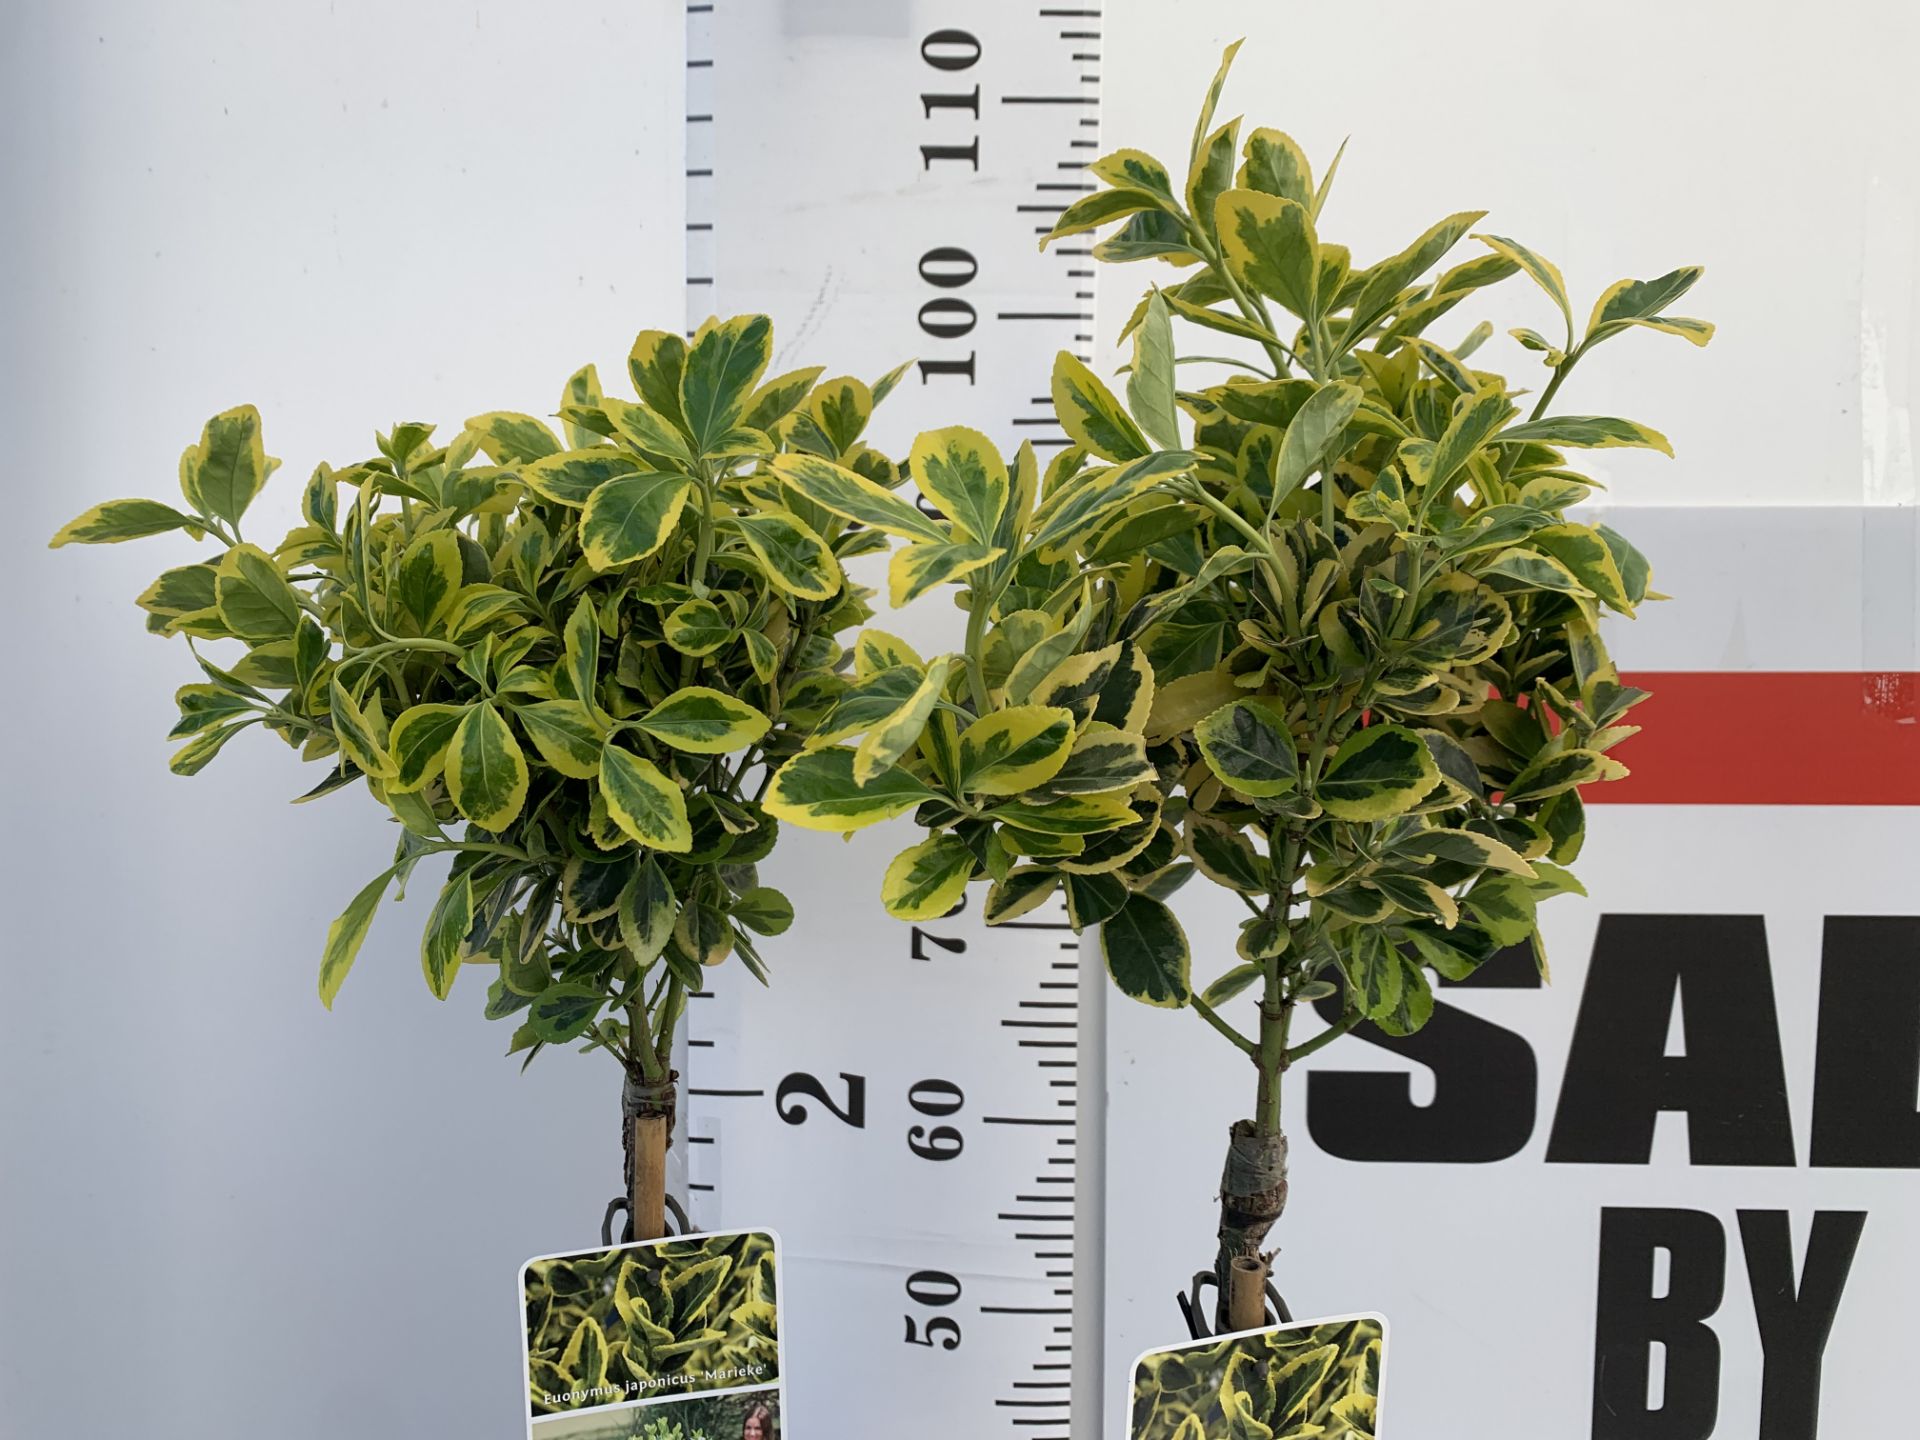 TWO STANDARD EUONYMOUS JAPONICUS MARIEKE IN 3 LTR POTS 90CM TALL PLUS VAT TO BE SOLD FOR THE TWO - Image 3 of 10